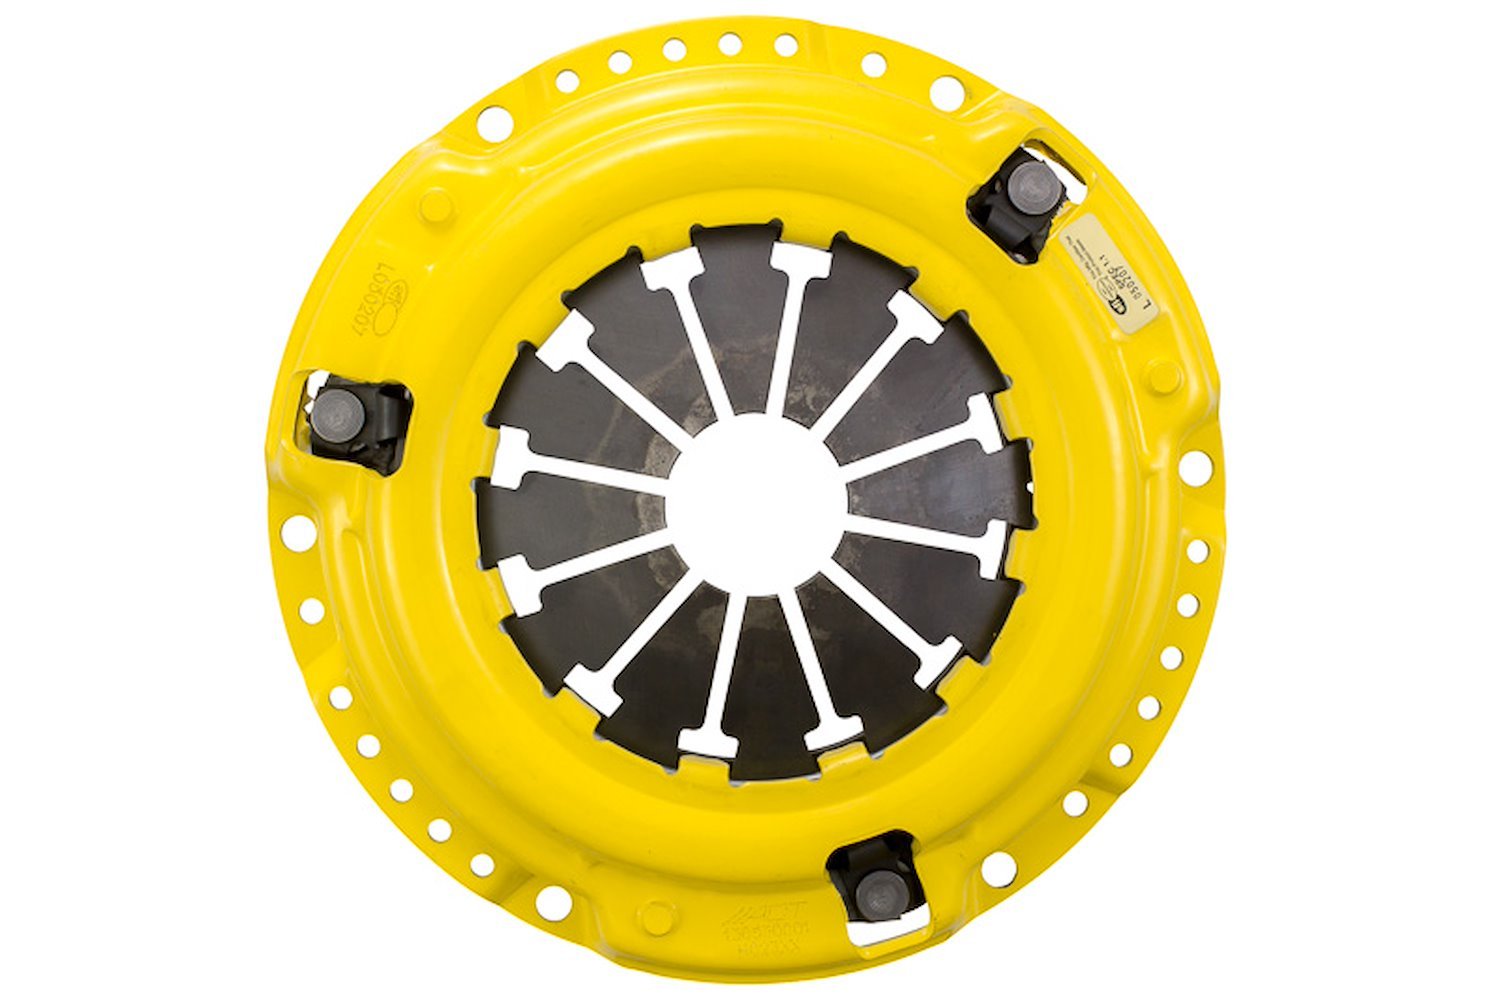 MaXX Xtreme Transmission Clutch Pressure Plate Fits Select Acura/Honda